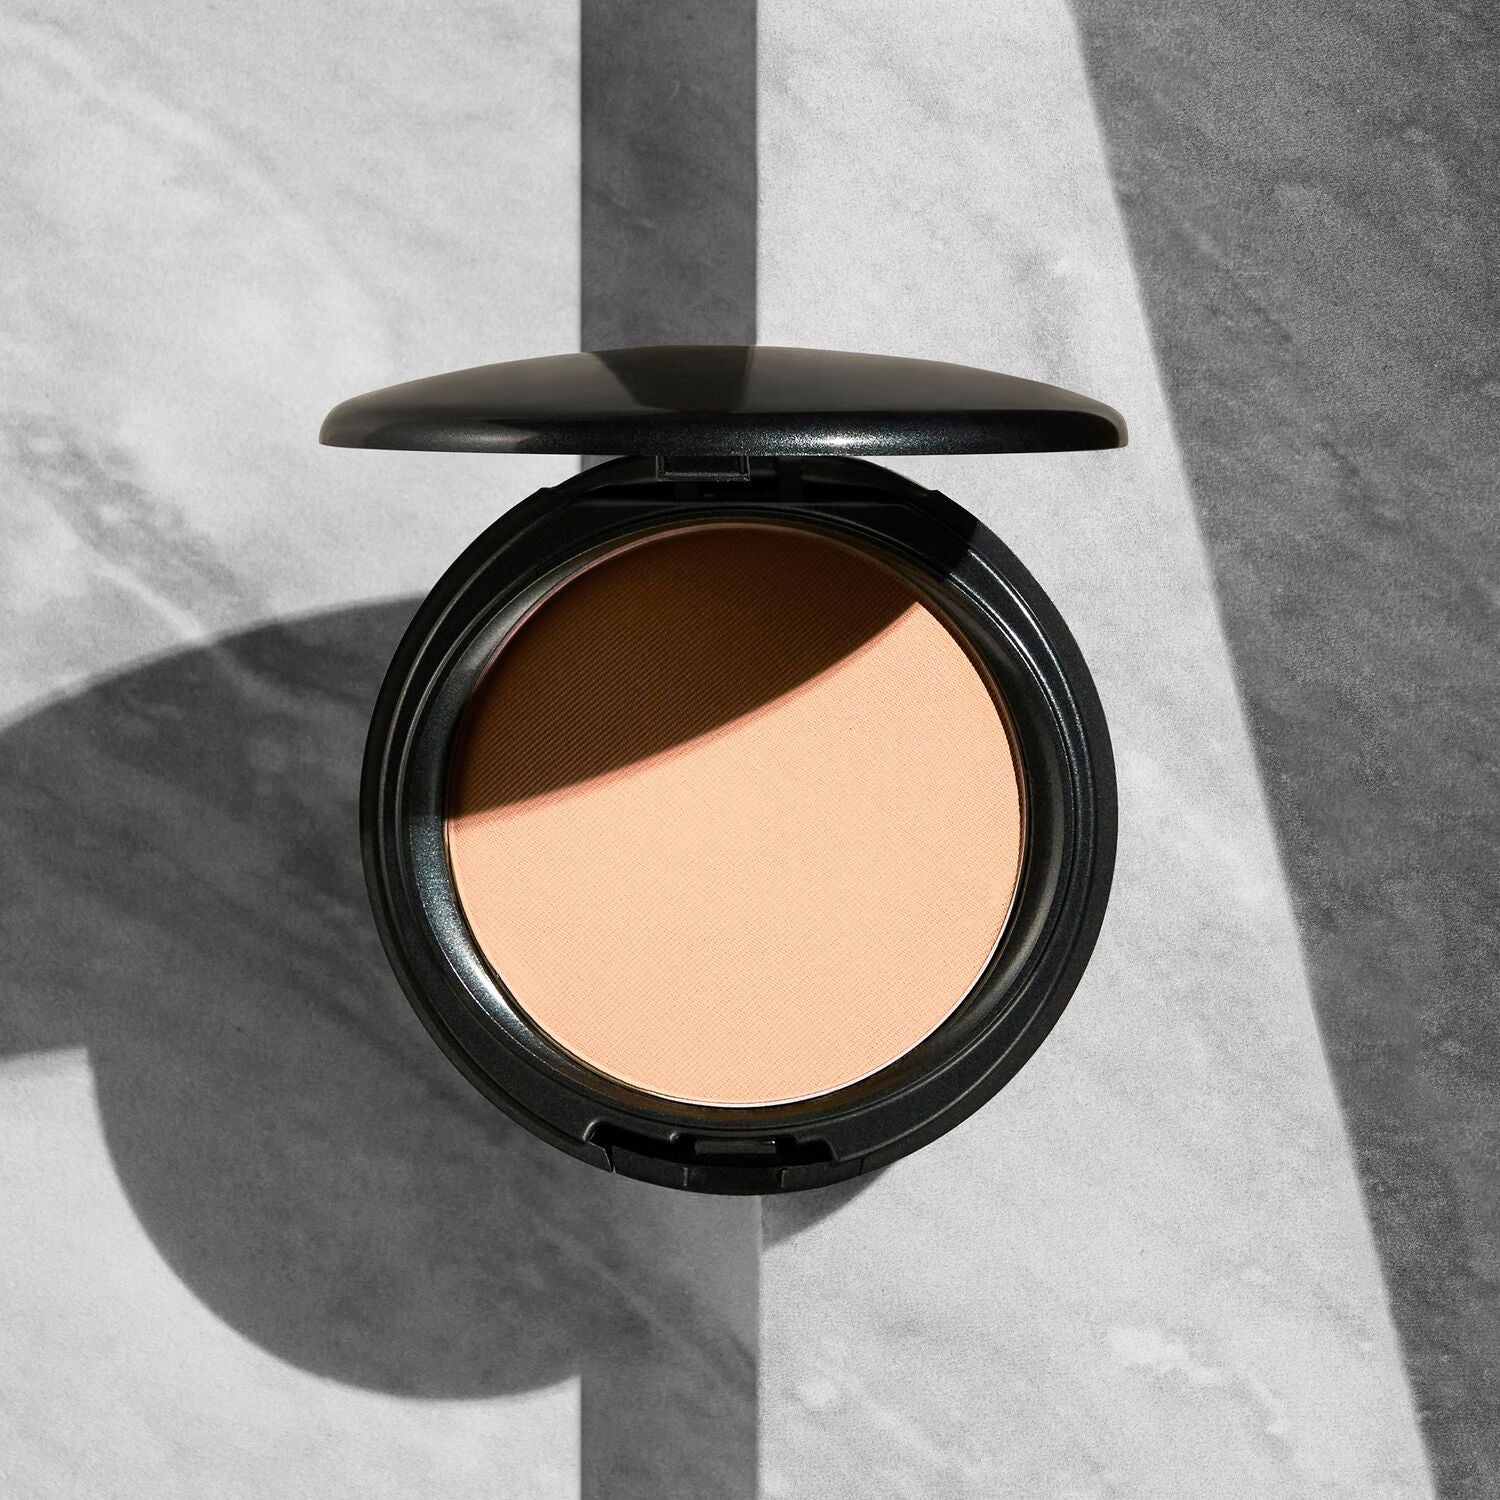 Coverfx Pressed Mineral Foundation in shade F1